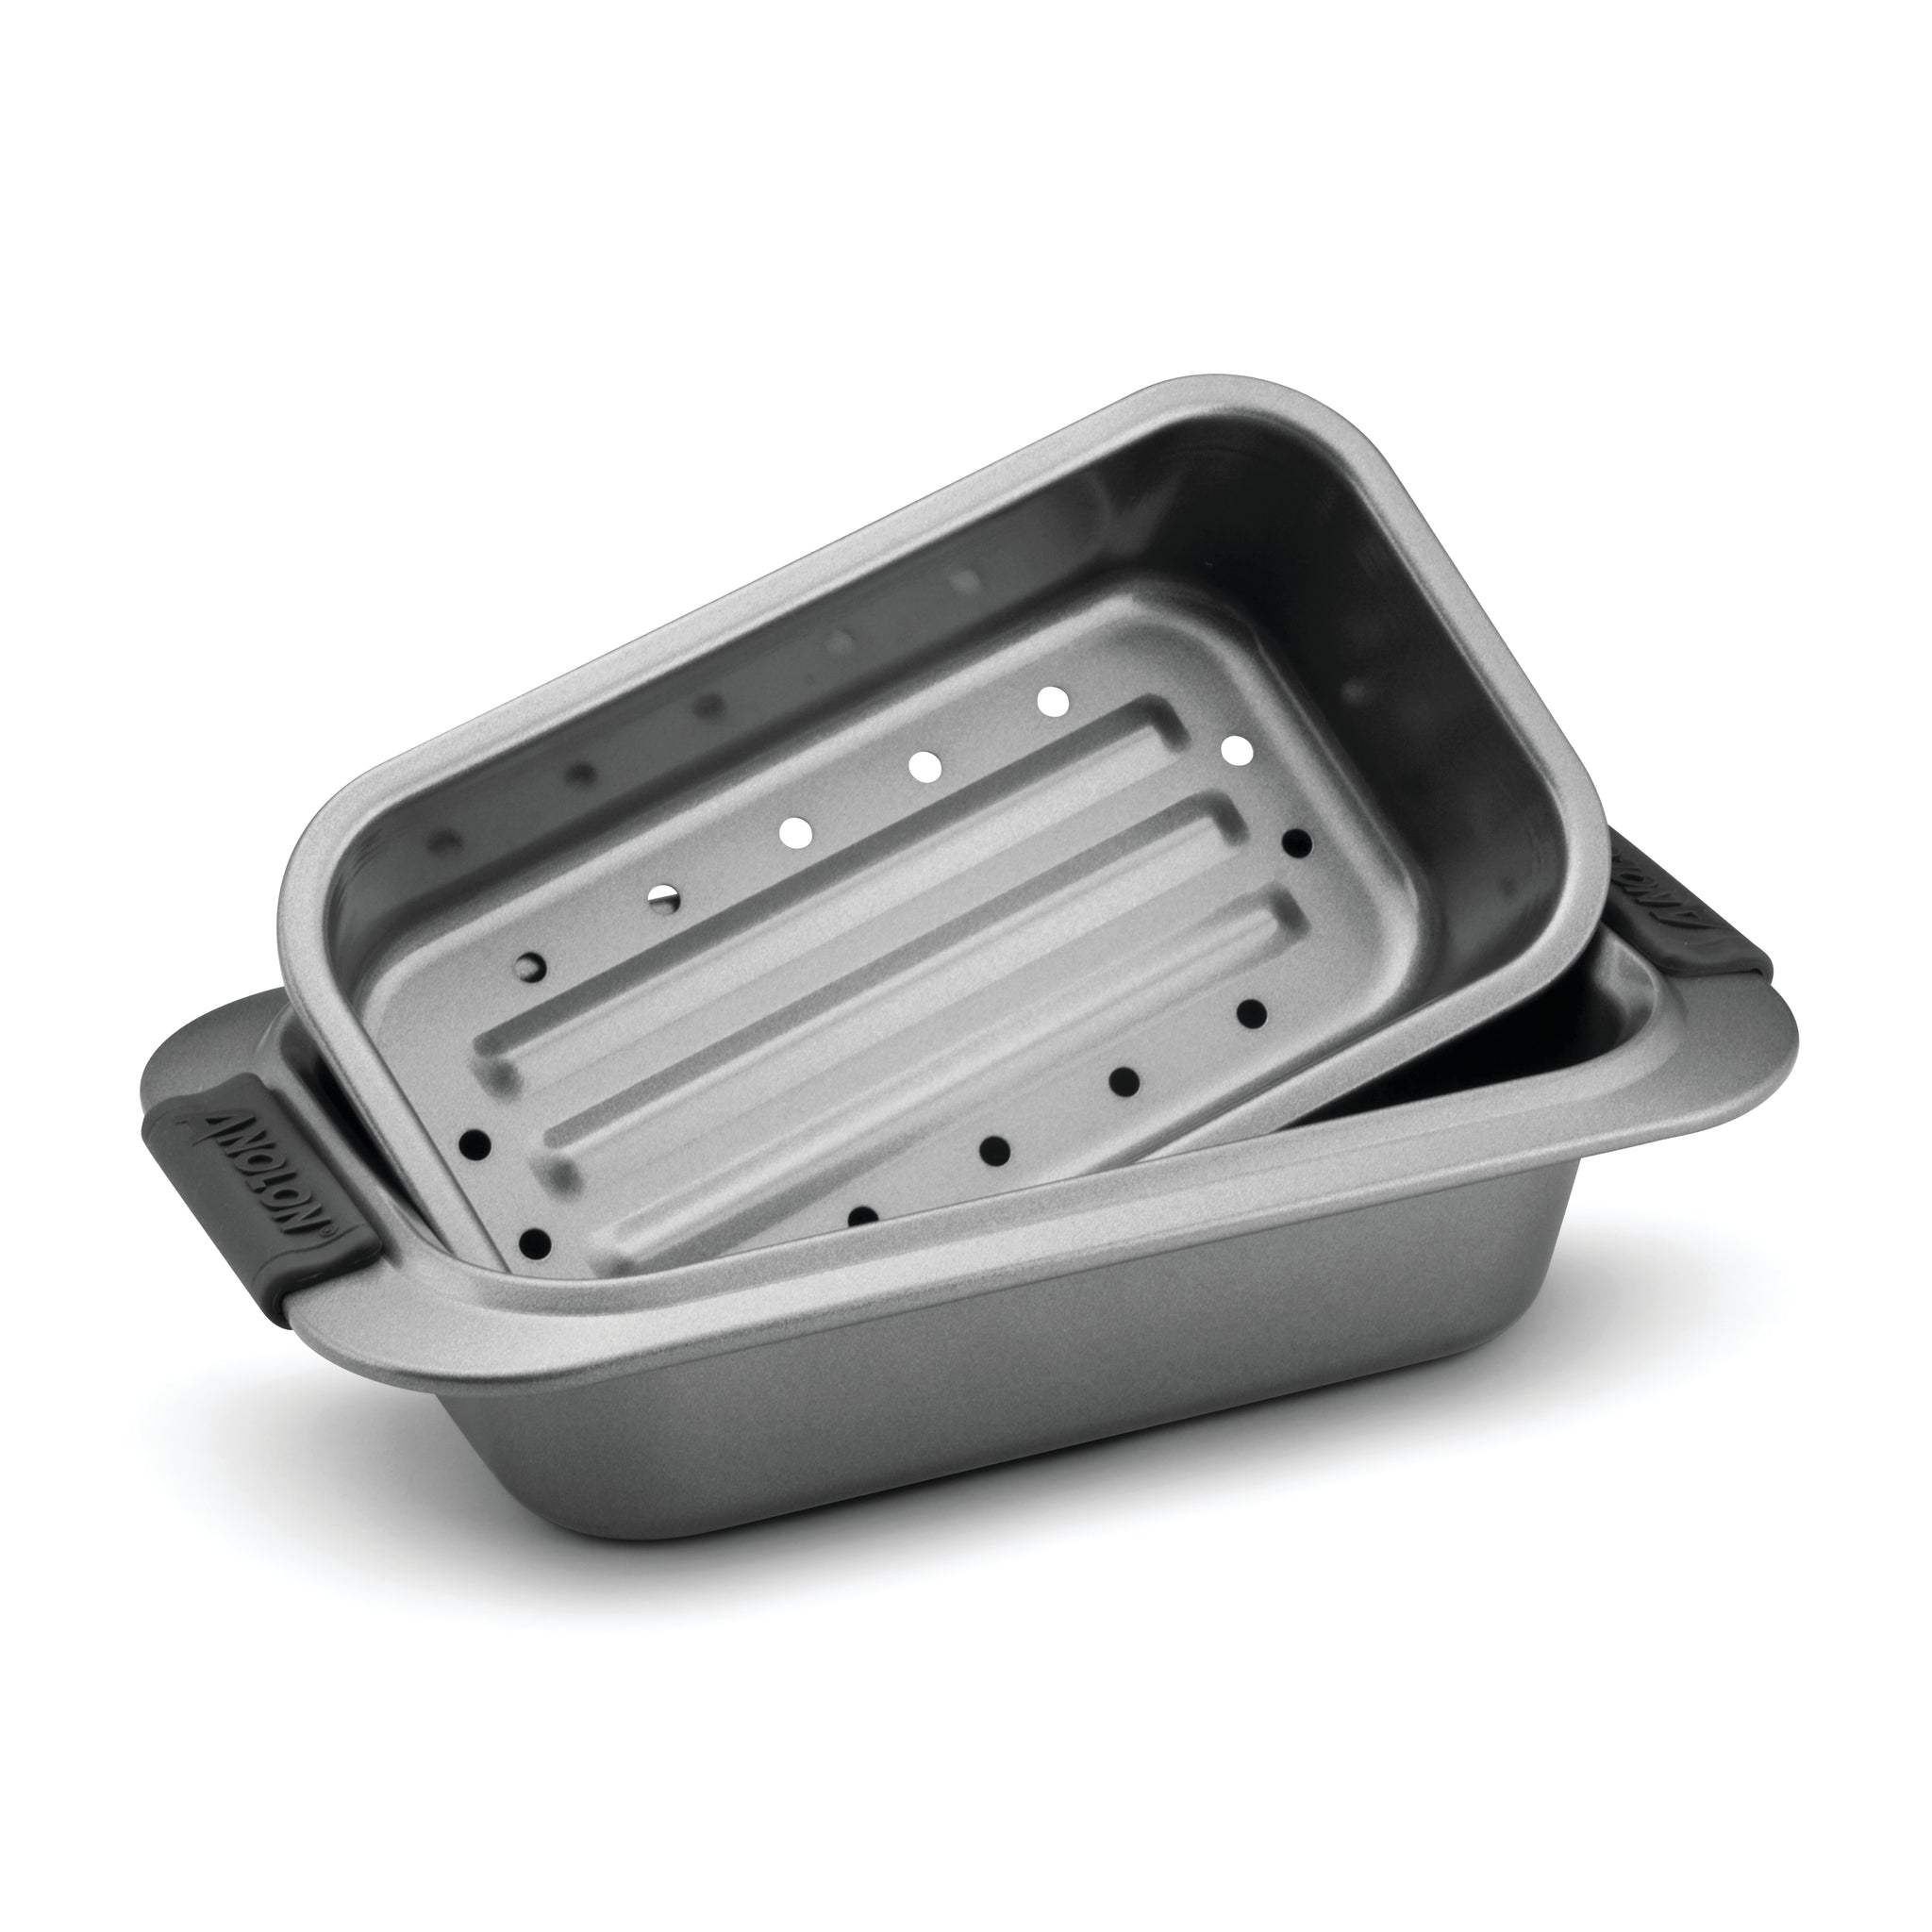 Anolon Advanced Nonstick Bakeware Set with Grips includes Nonstick Bread Pan,  Cookie Sheet / Baking Sheet and Baking Pan - 3 Piece, Gray